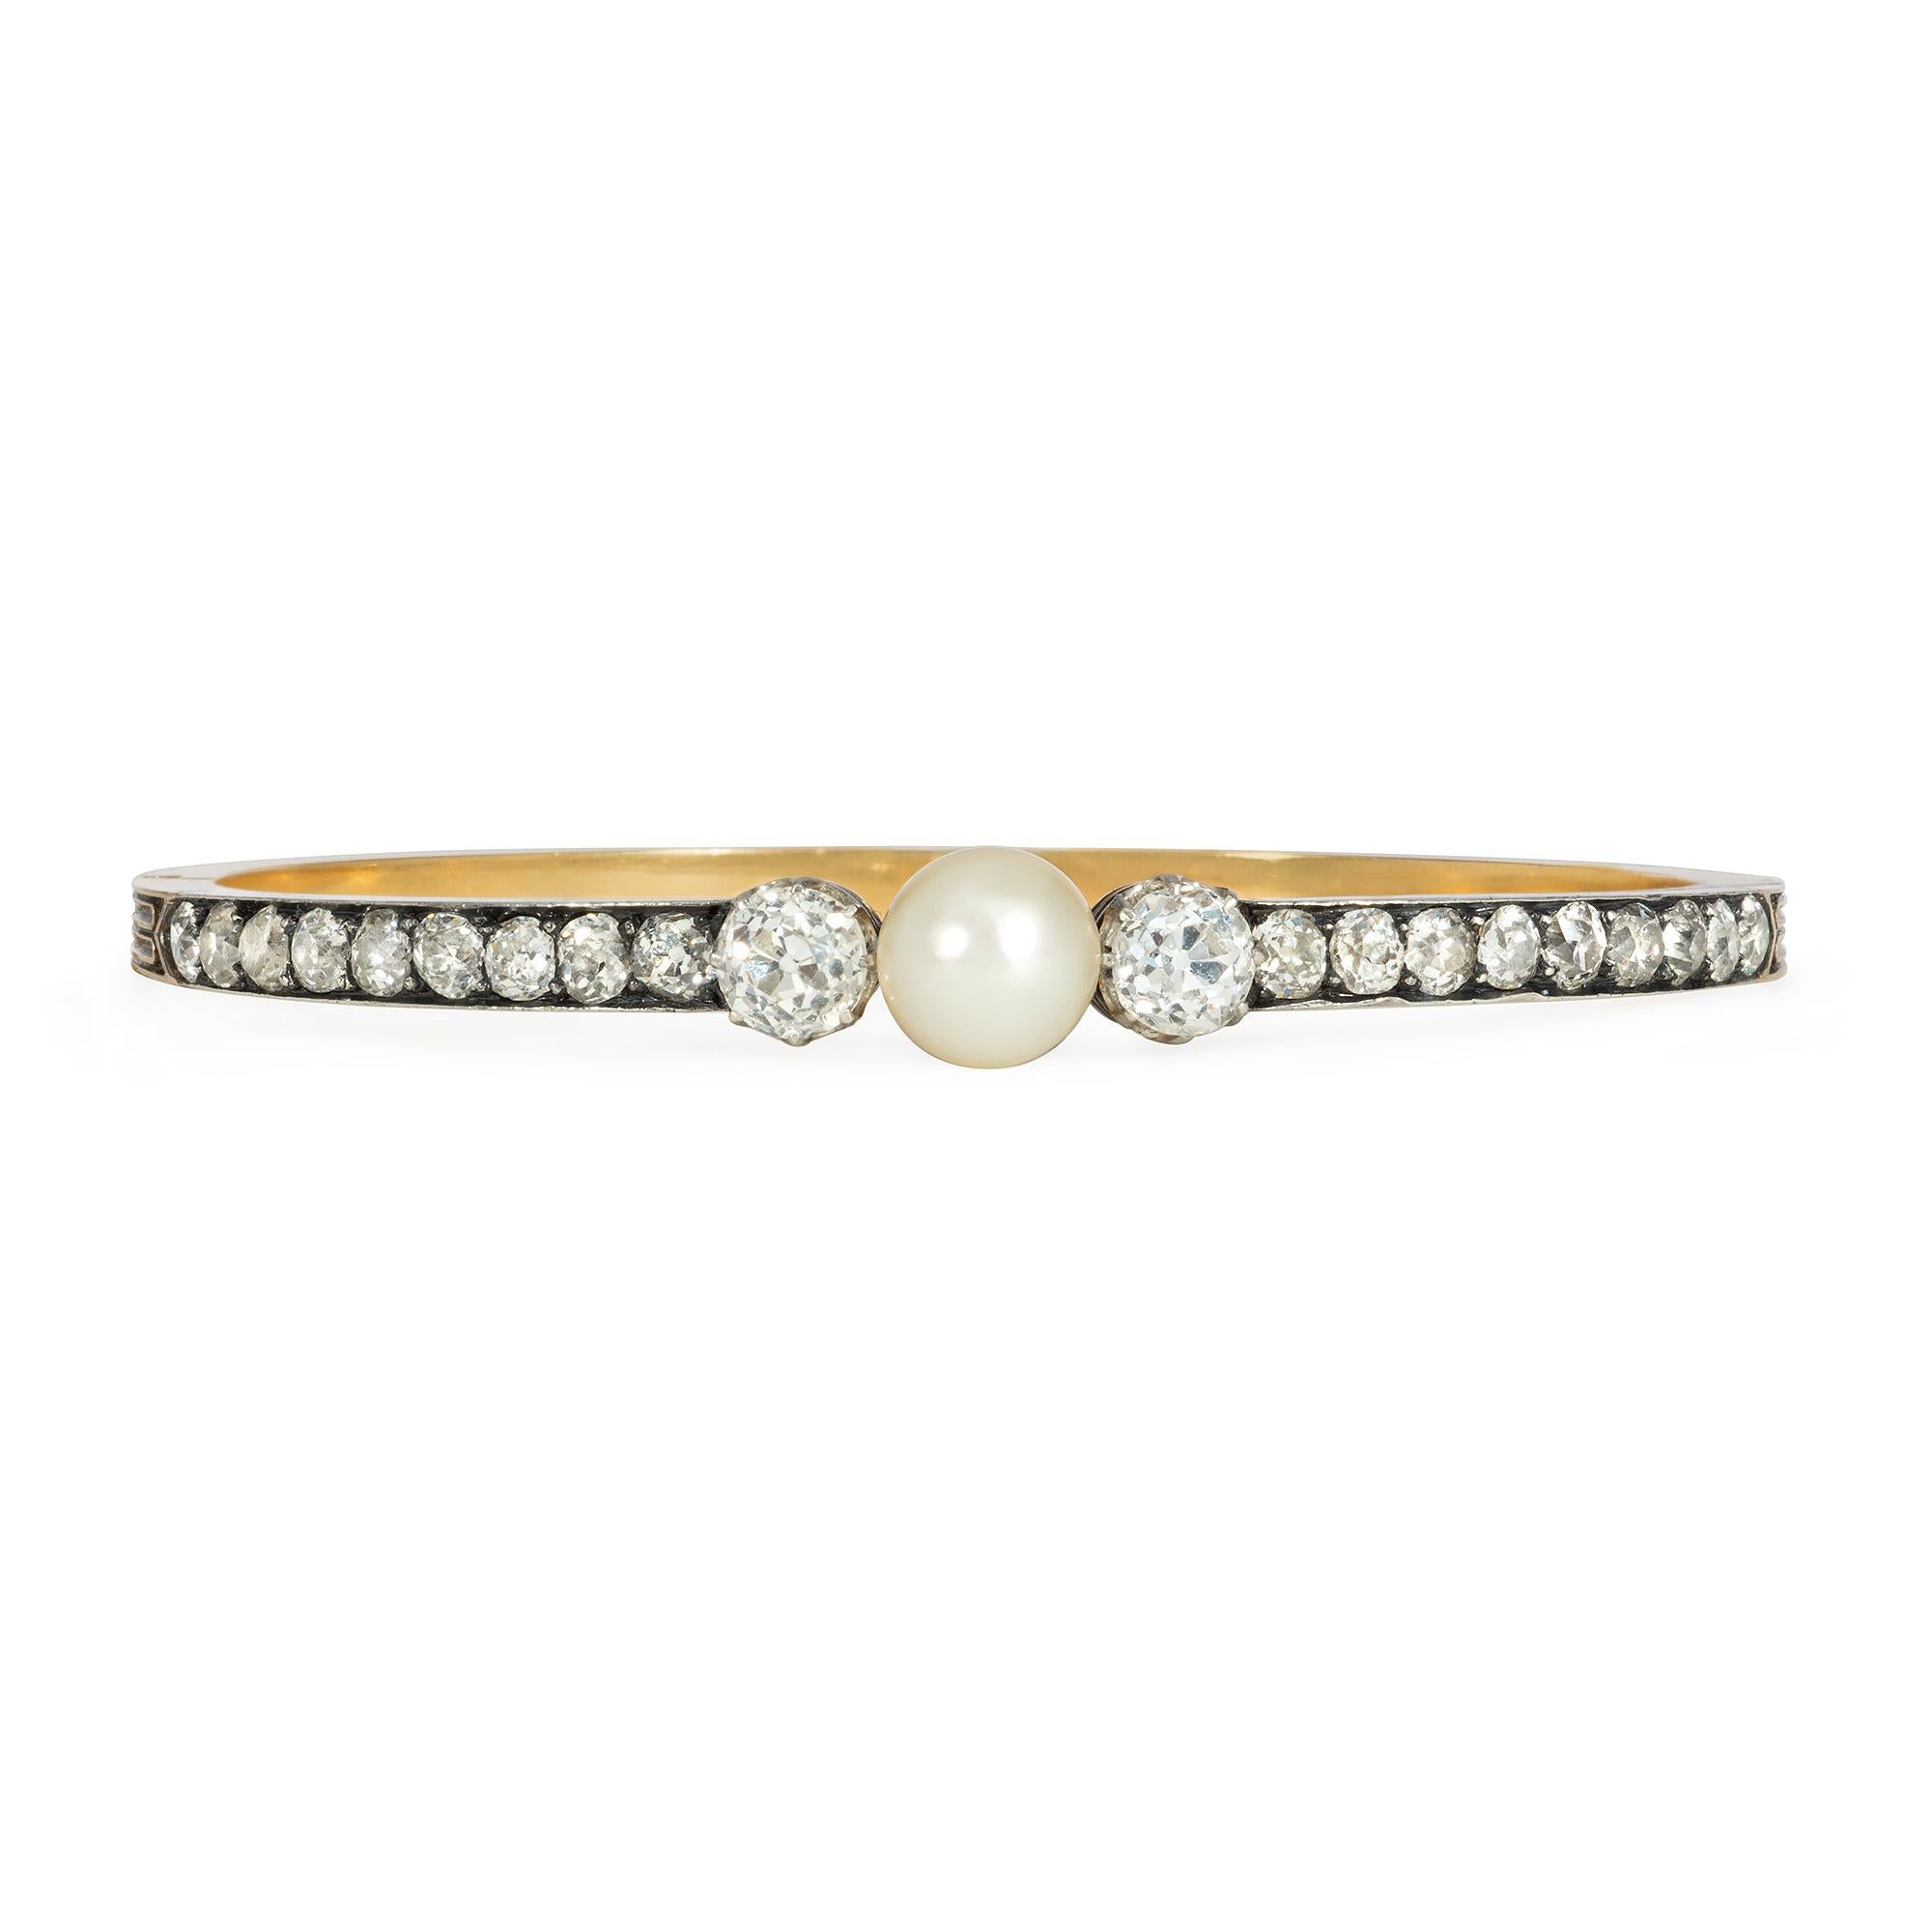 An antique Victorian period gold, diamond, and pearl hinged bangle bracelet, the top set with a row of old mine-cut diamonds and centering on a pearl flanked by two old European-cut diamonds, in sterling silver and 18k.  France.  Atw 3.23 cts.